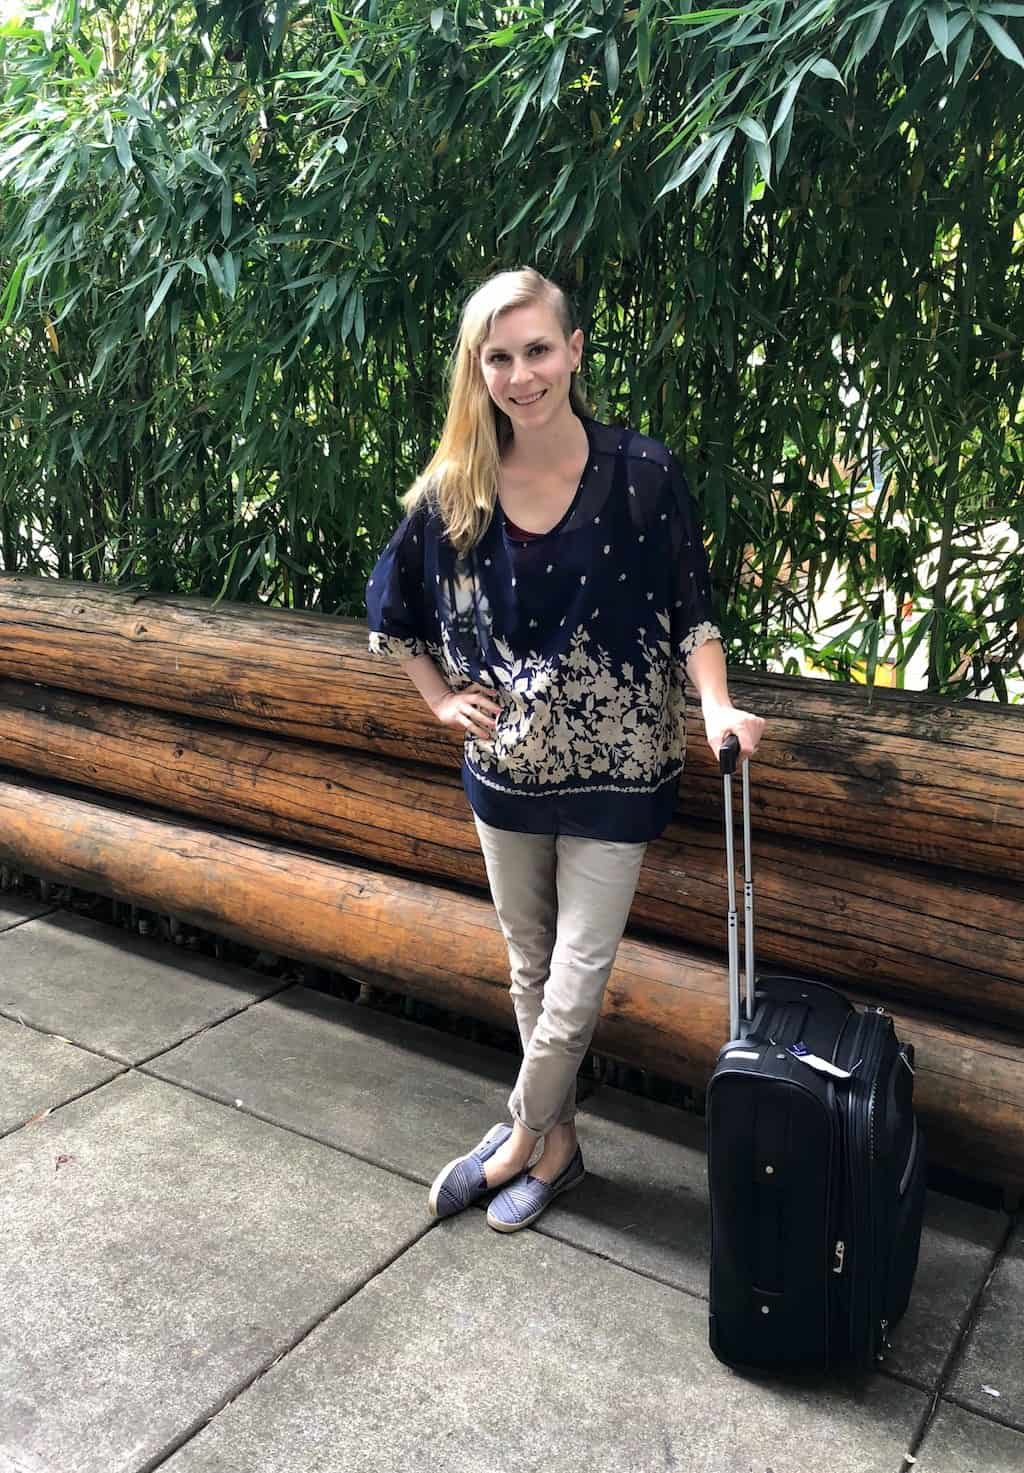 This travel blogger shares her favorite luggage sets—that won't cost you a fortune